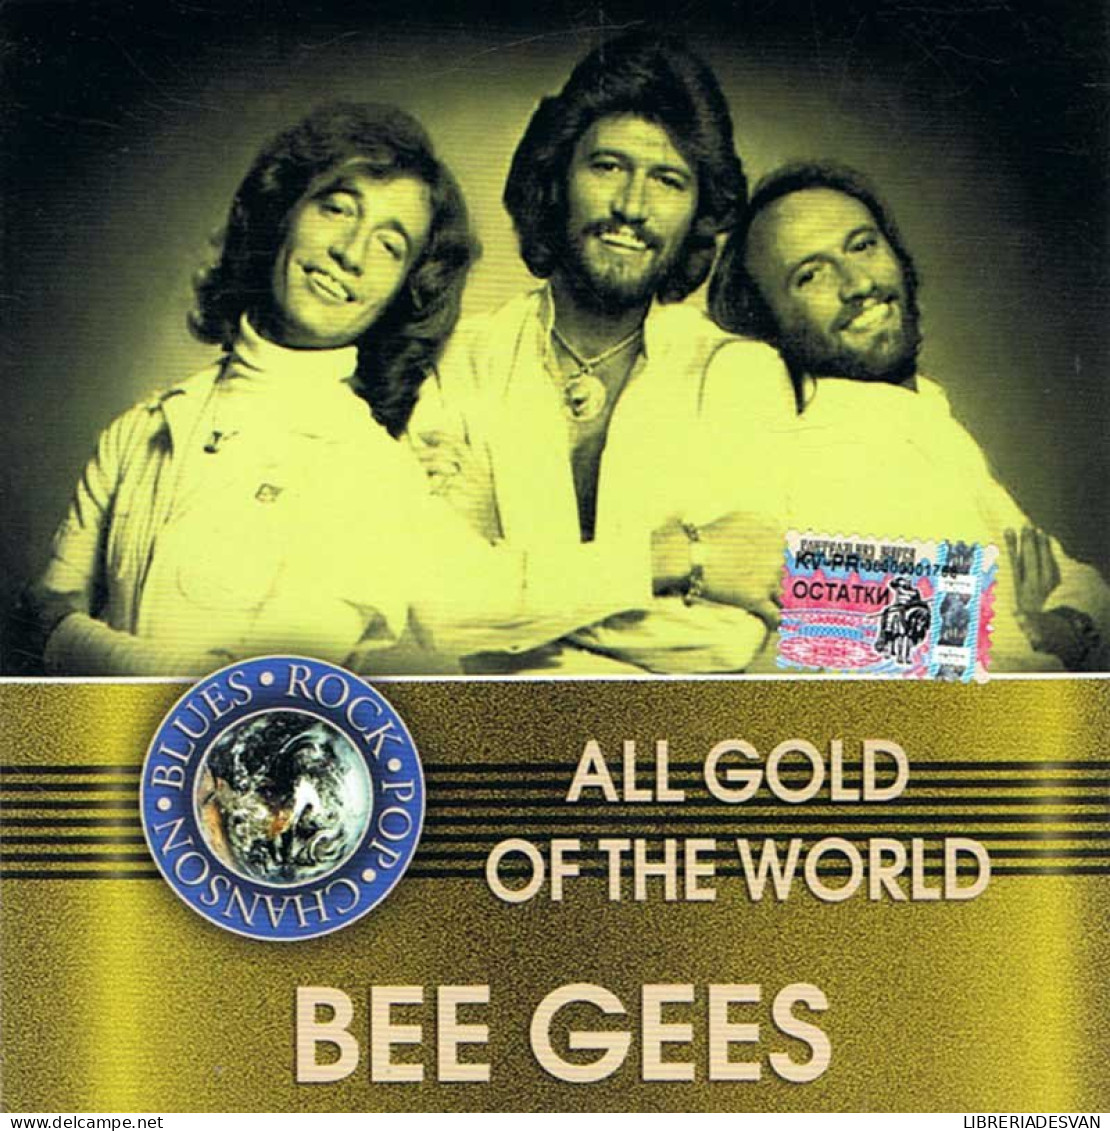 Bee Gees - All Gold Of The World. CD - Disco, Pop